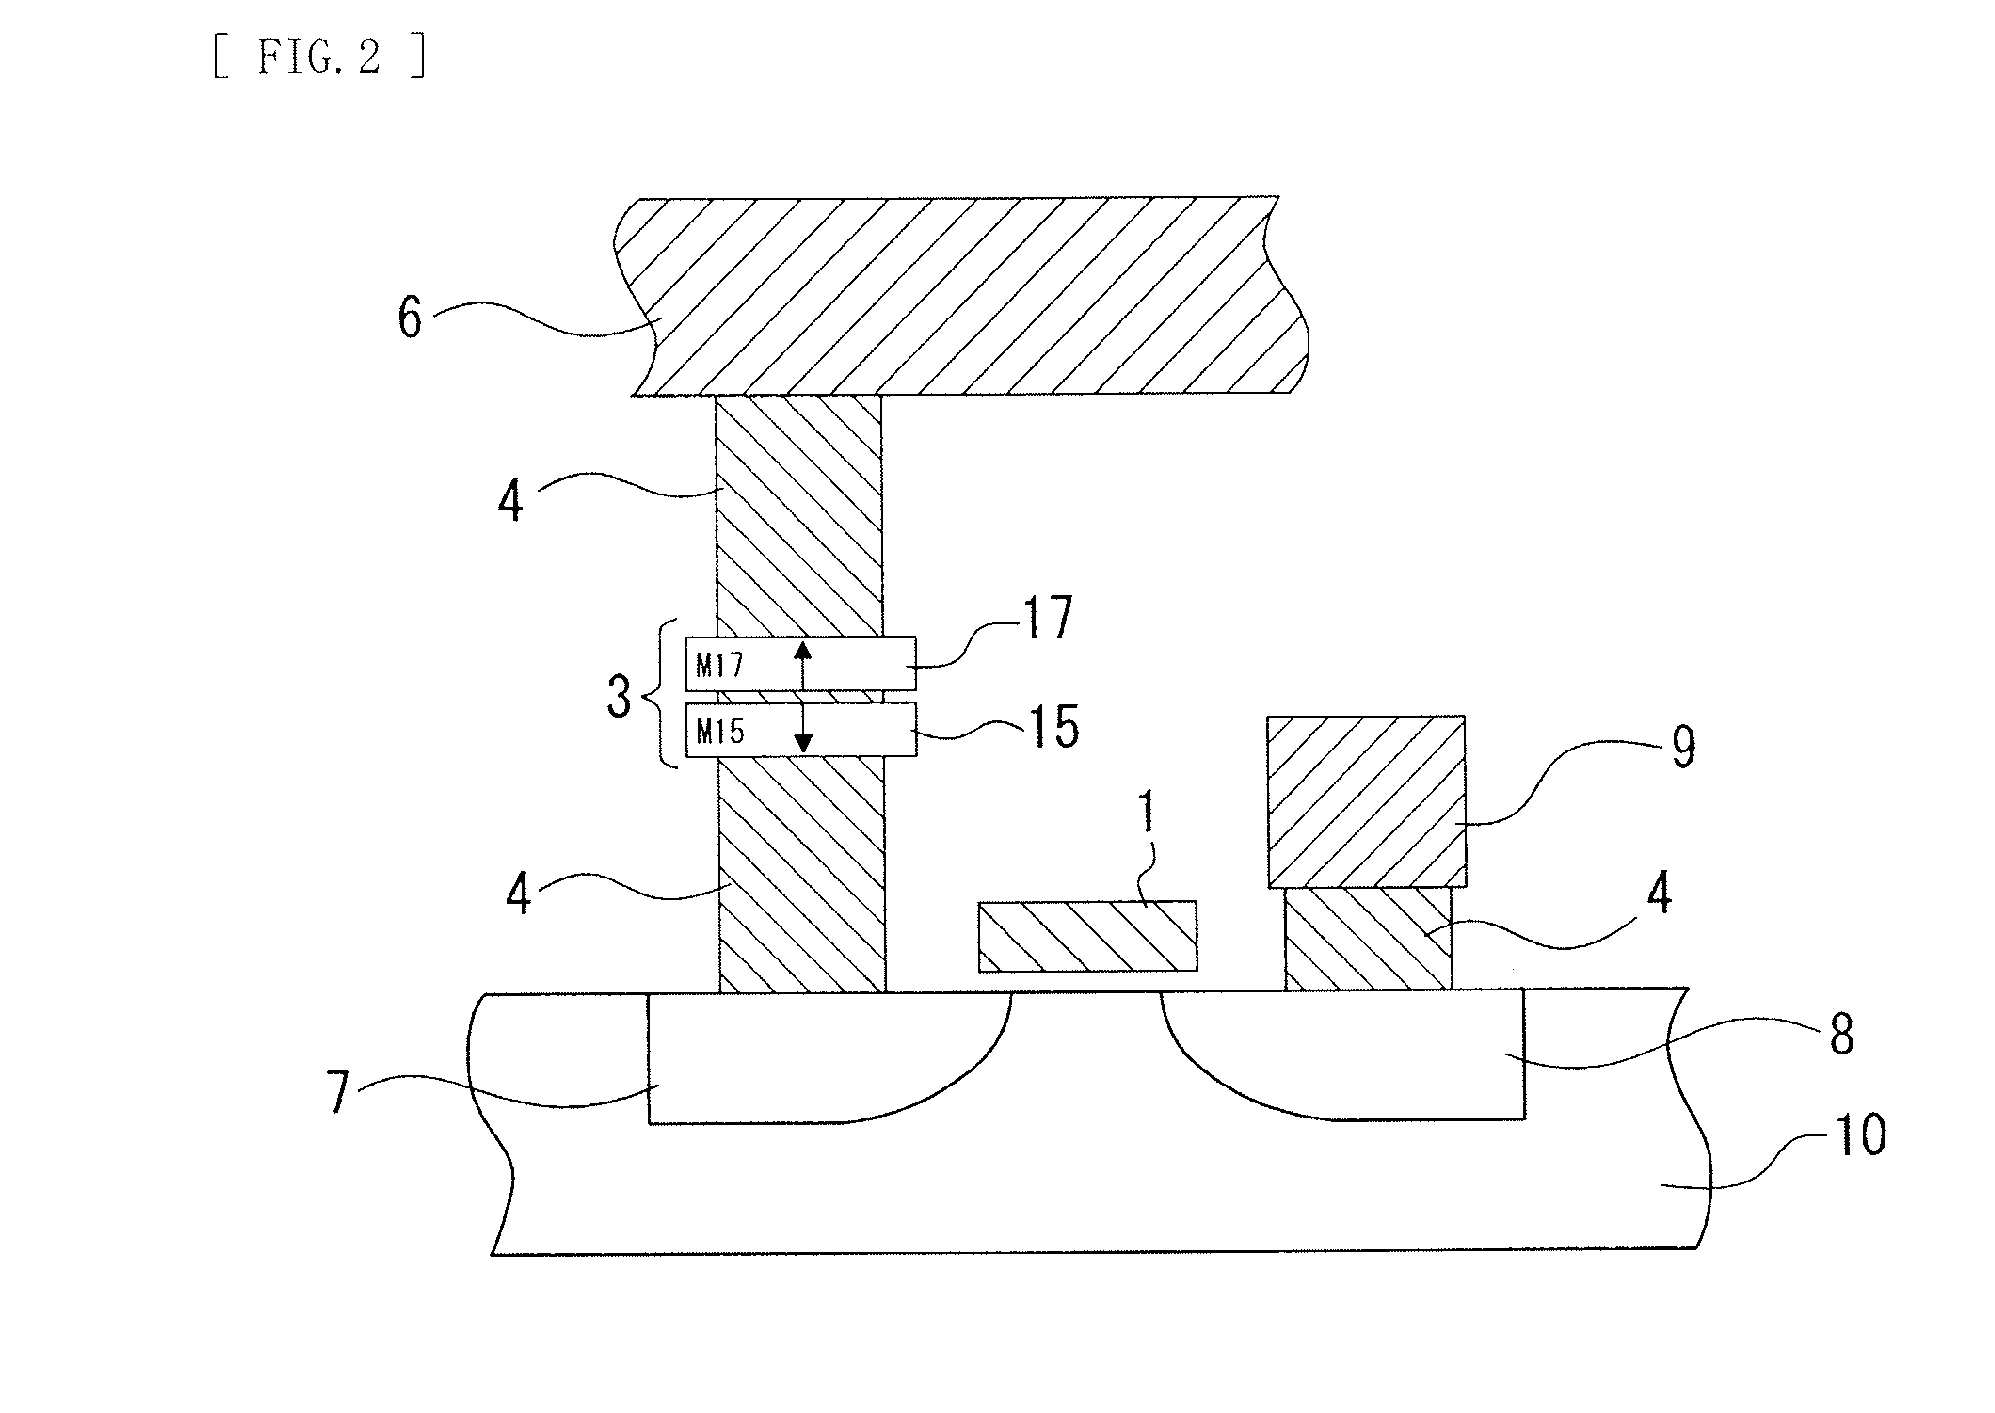 Storage cell, storage device, and magnetic head